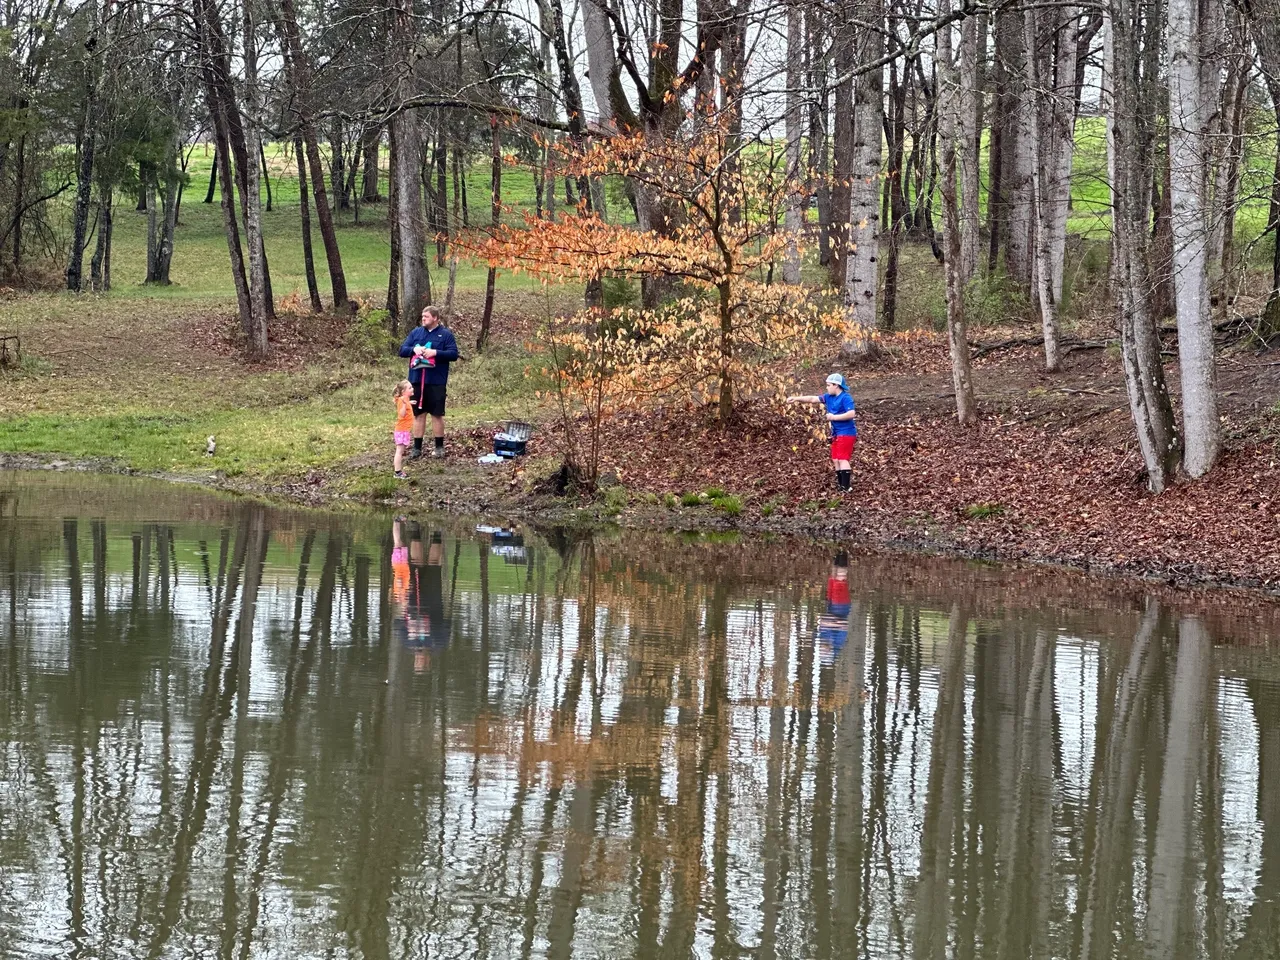 Two people fishing in a pond near trees.